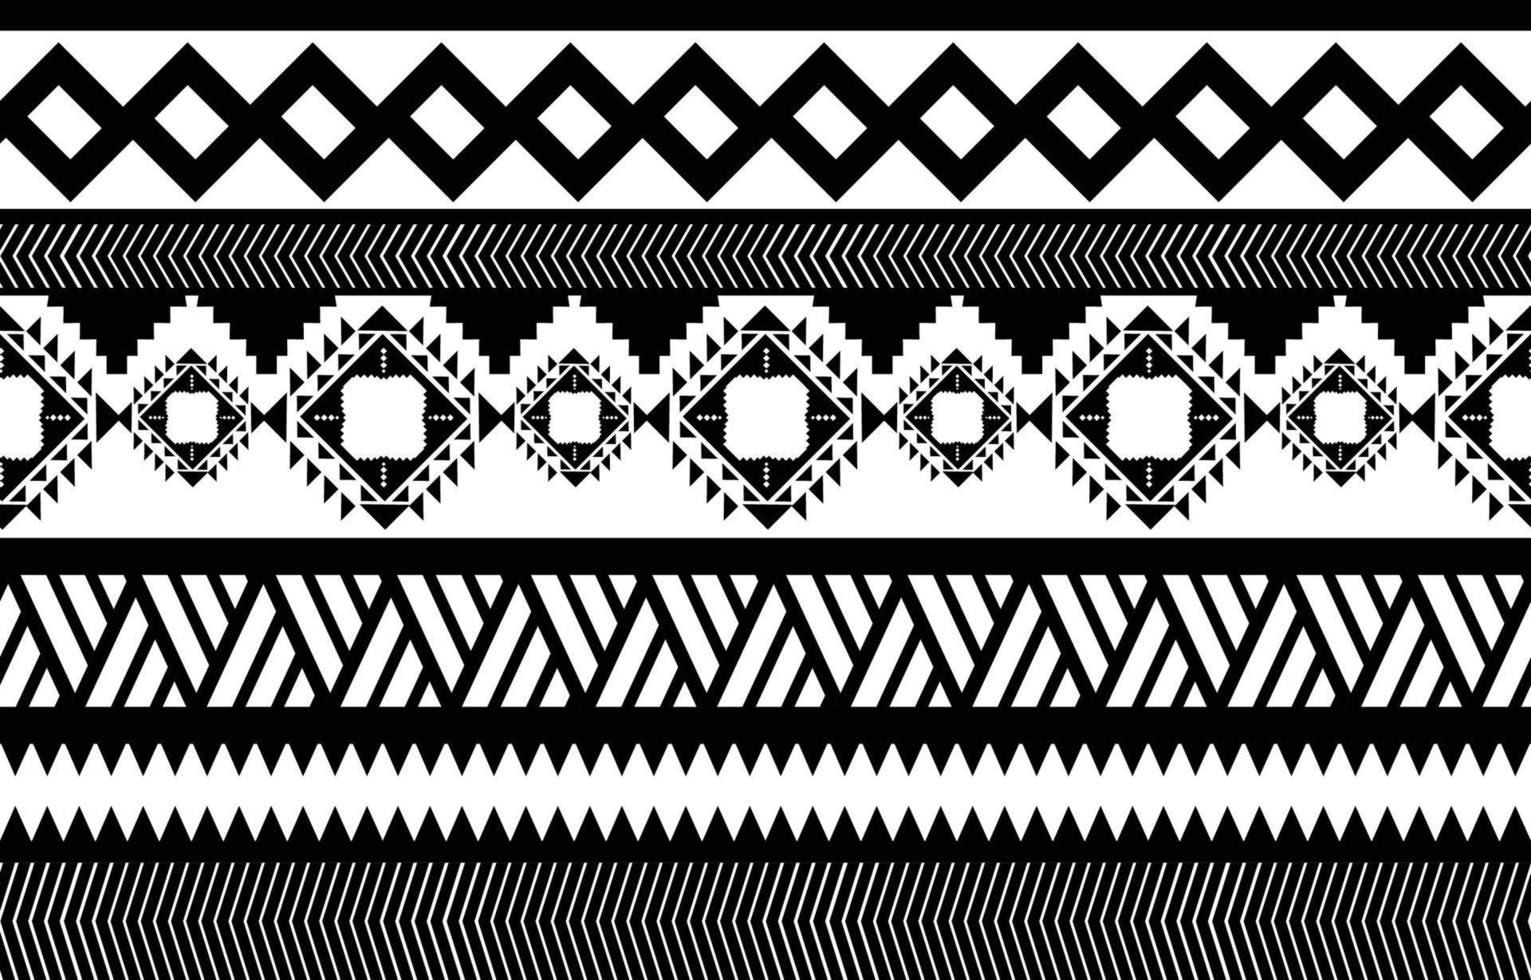 African tribal black and white abstract ethnic geometric pattern. design for background or wallpaper.vector illustration to print fabric patterns, rugs, shirts, costumes, turban, hats, curtains. vector